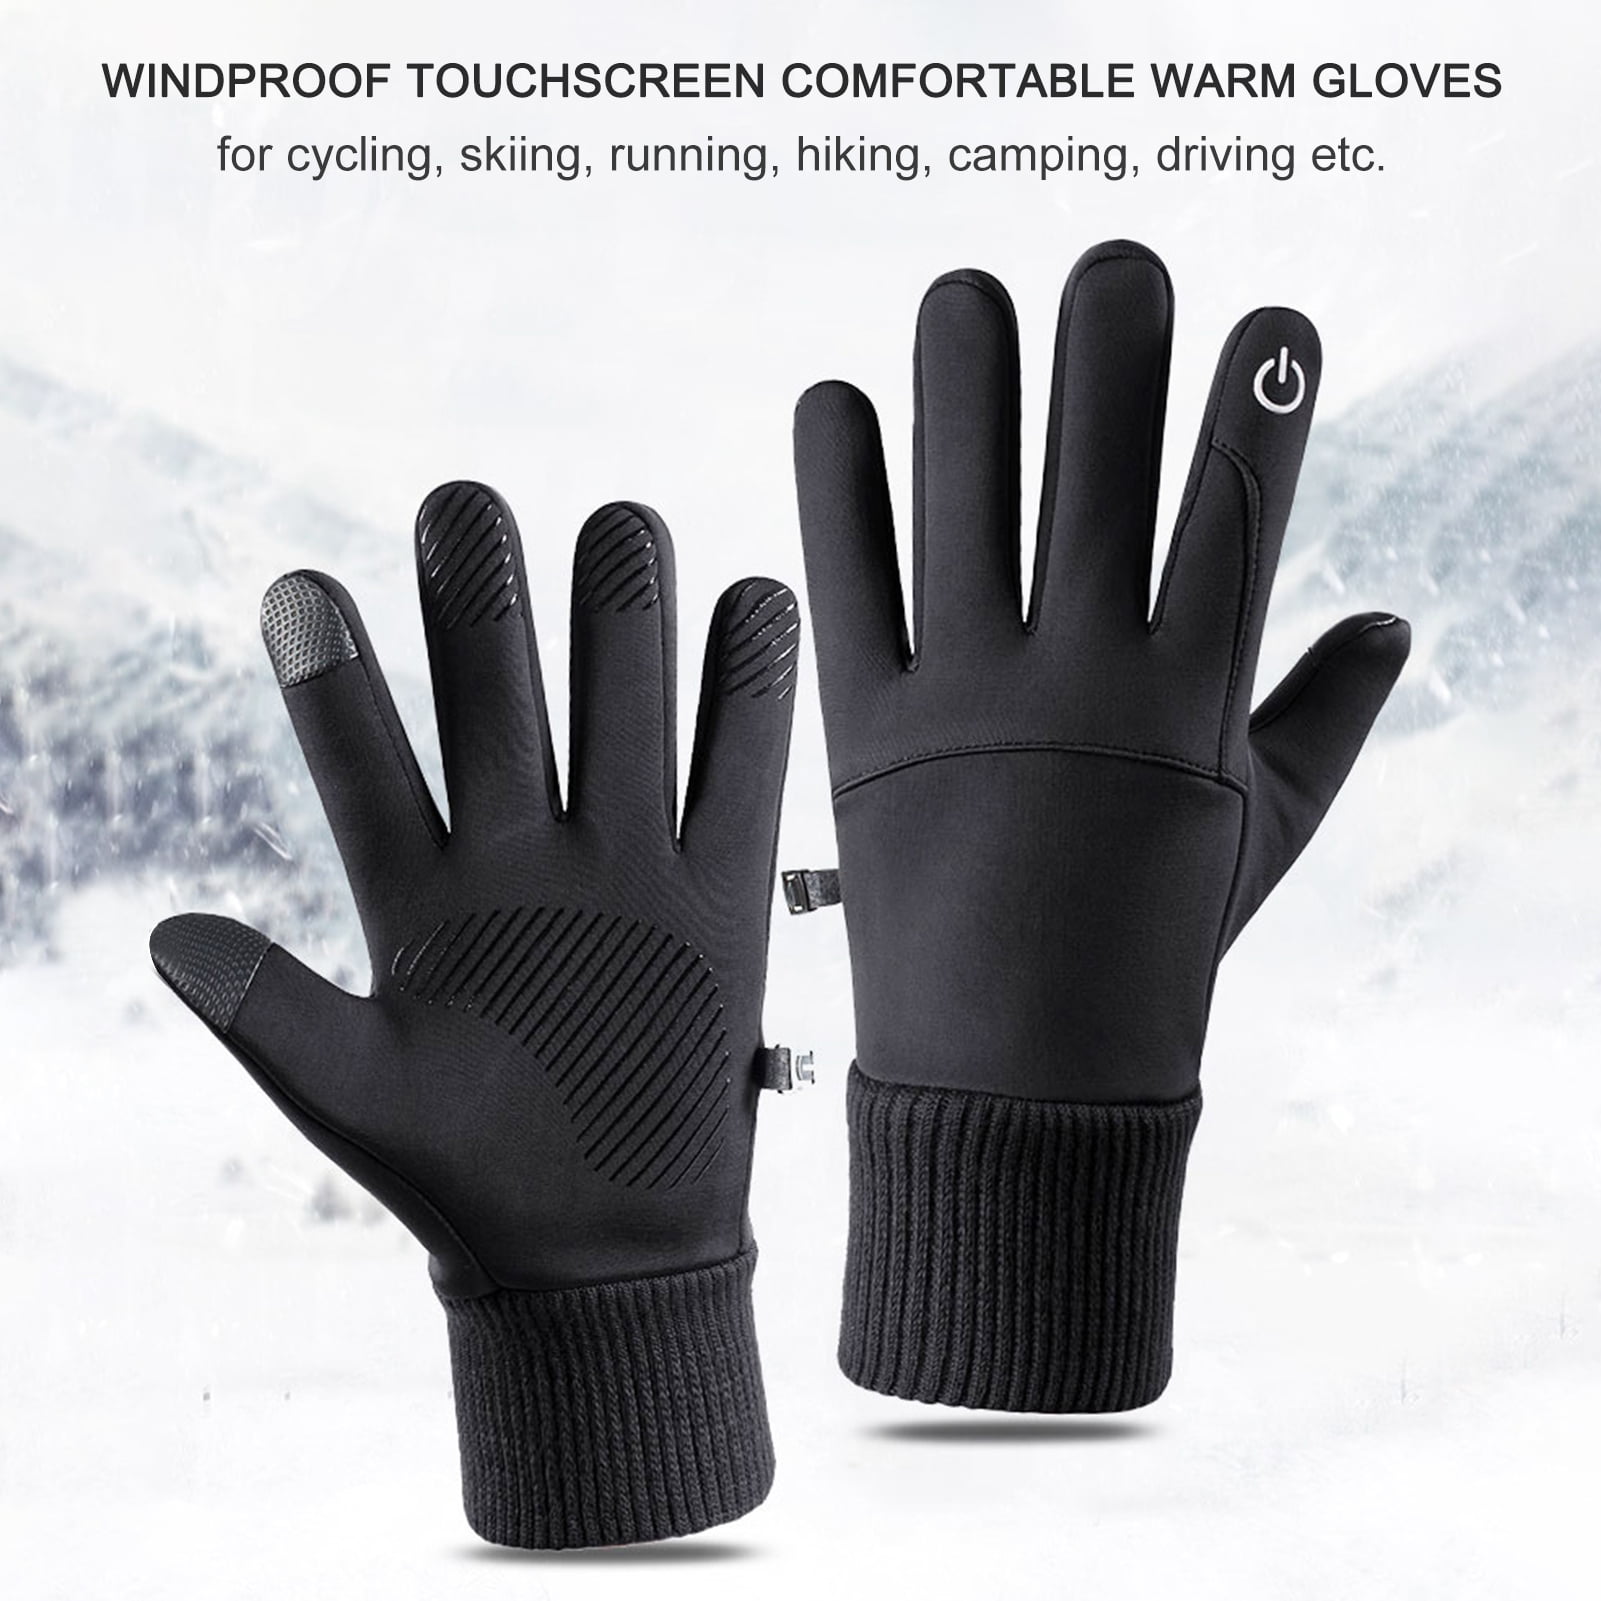 PURFUN Winter Windproof Waterproof Runing Gloves Soft Warm Fleece Lining Outdoor Sports Cycling Camping Ski Gloves Anti-Skid Driving Motorcycle Rider Mitts Hand Warmer Touch Screen Gloves 